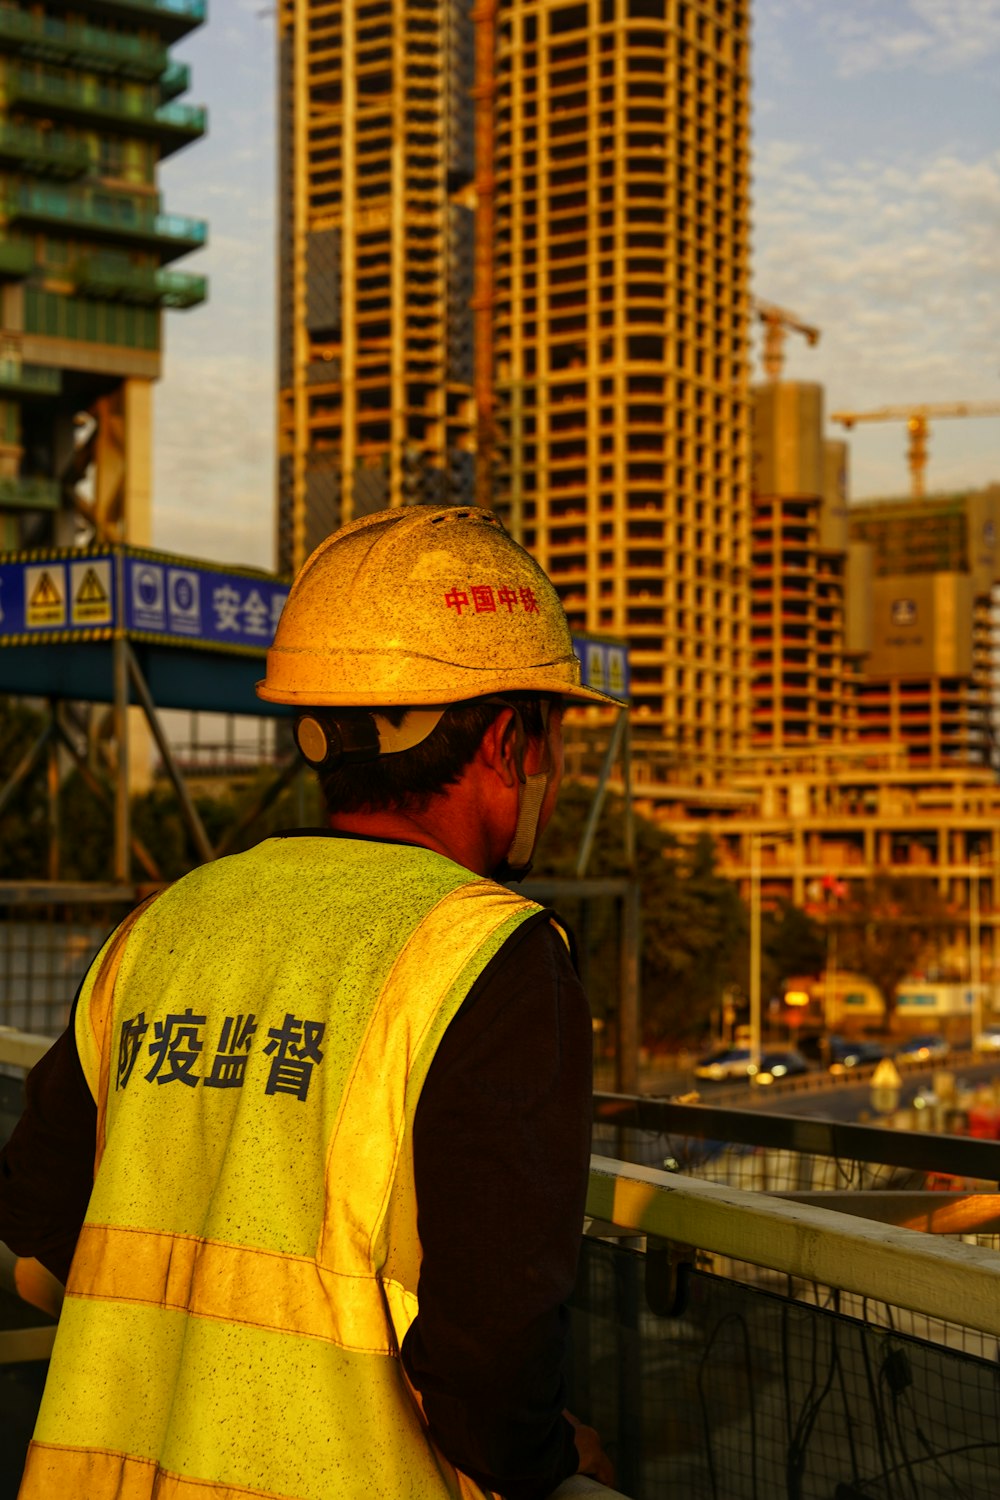 a man wearing a hard hat and safety vest